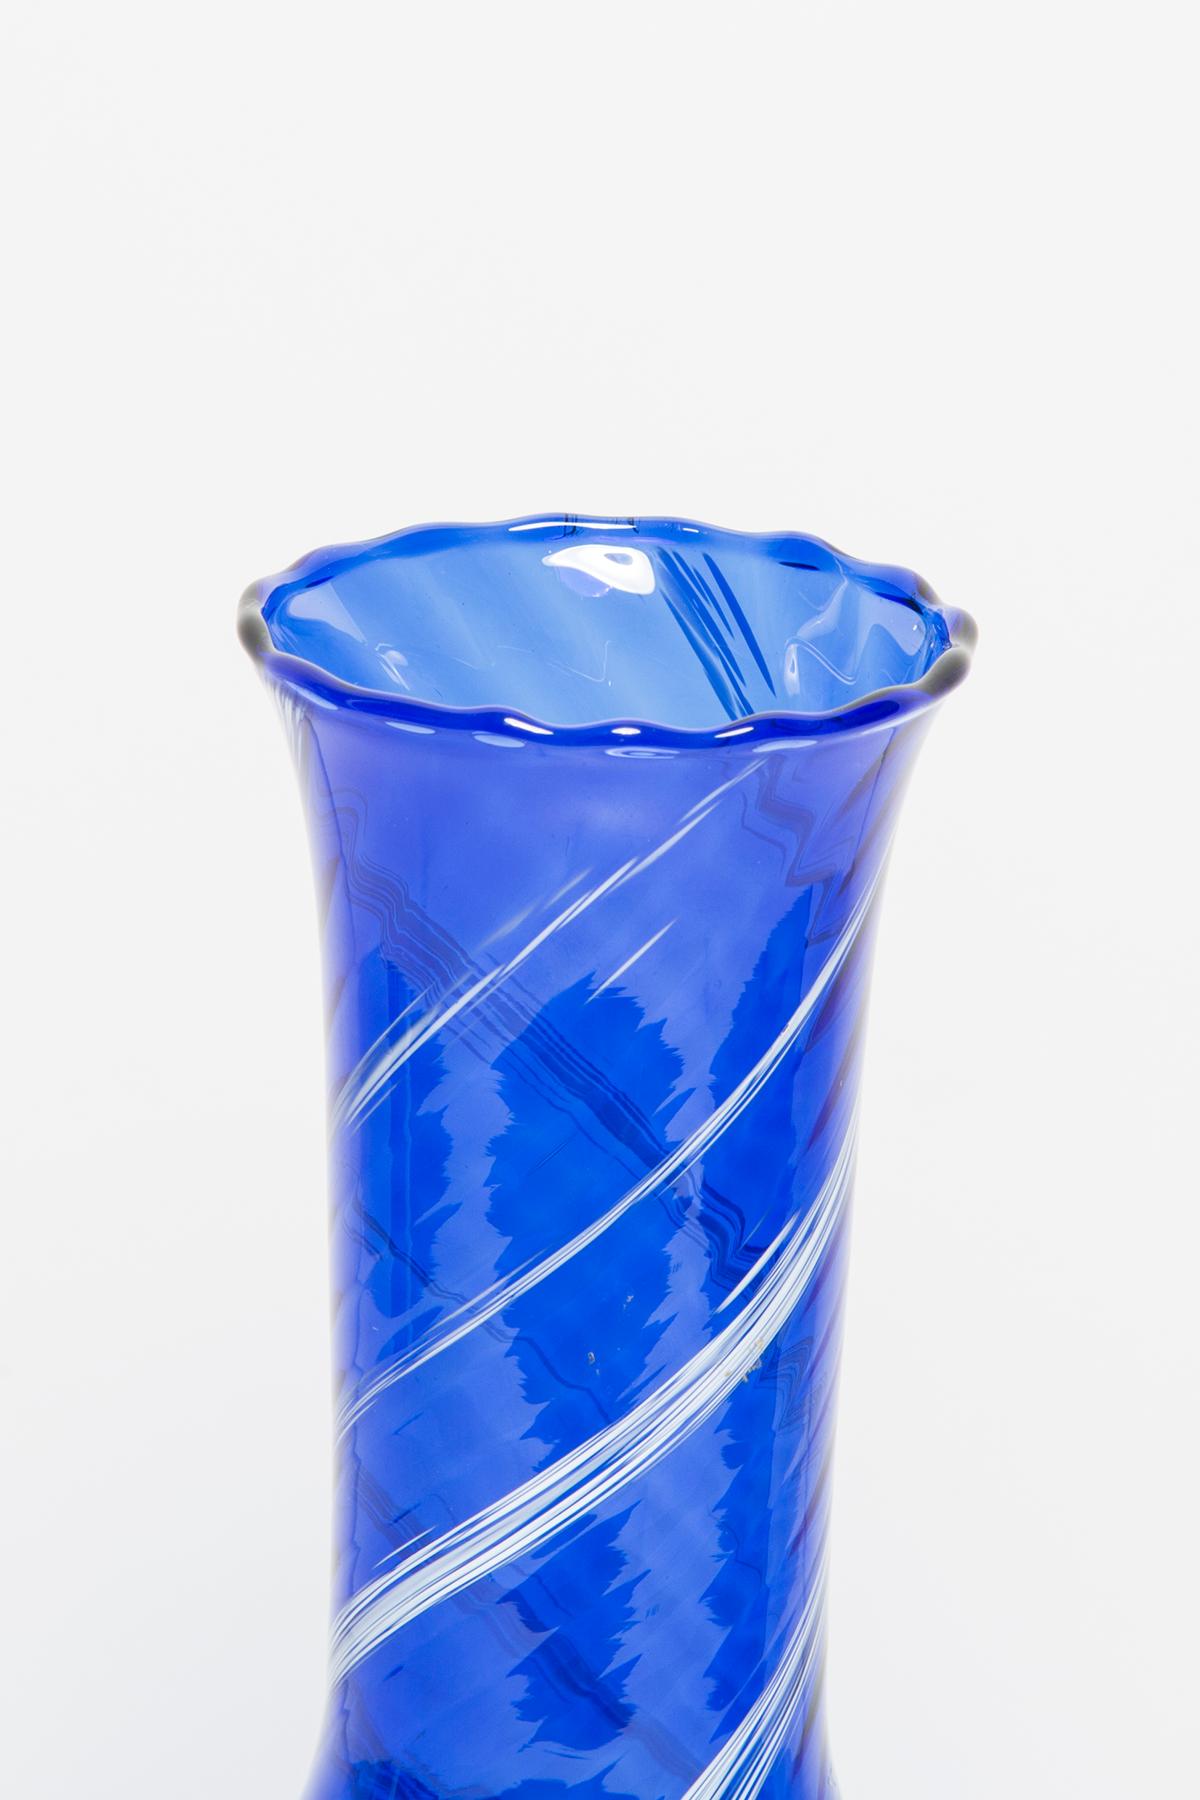 Mid Century Vintage Blue and White Artistic Glass Vase Bottle, Europe, 1970s For Sale 2